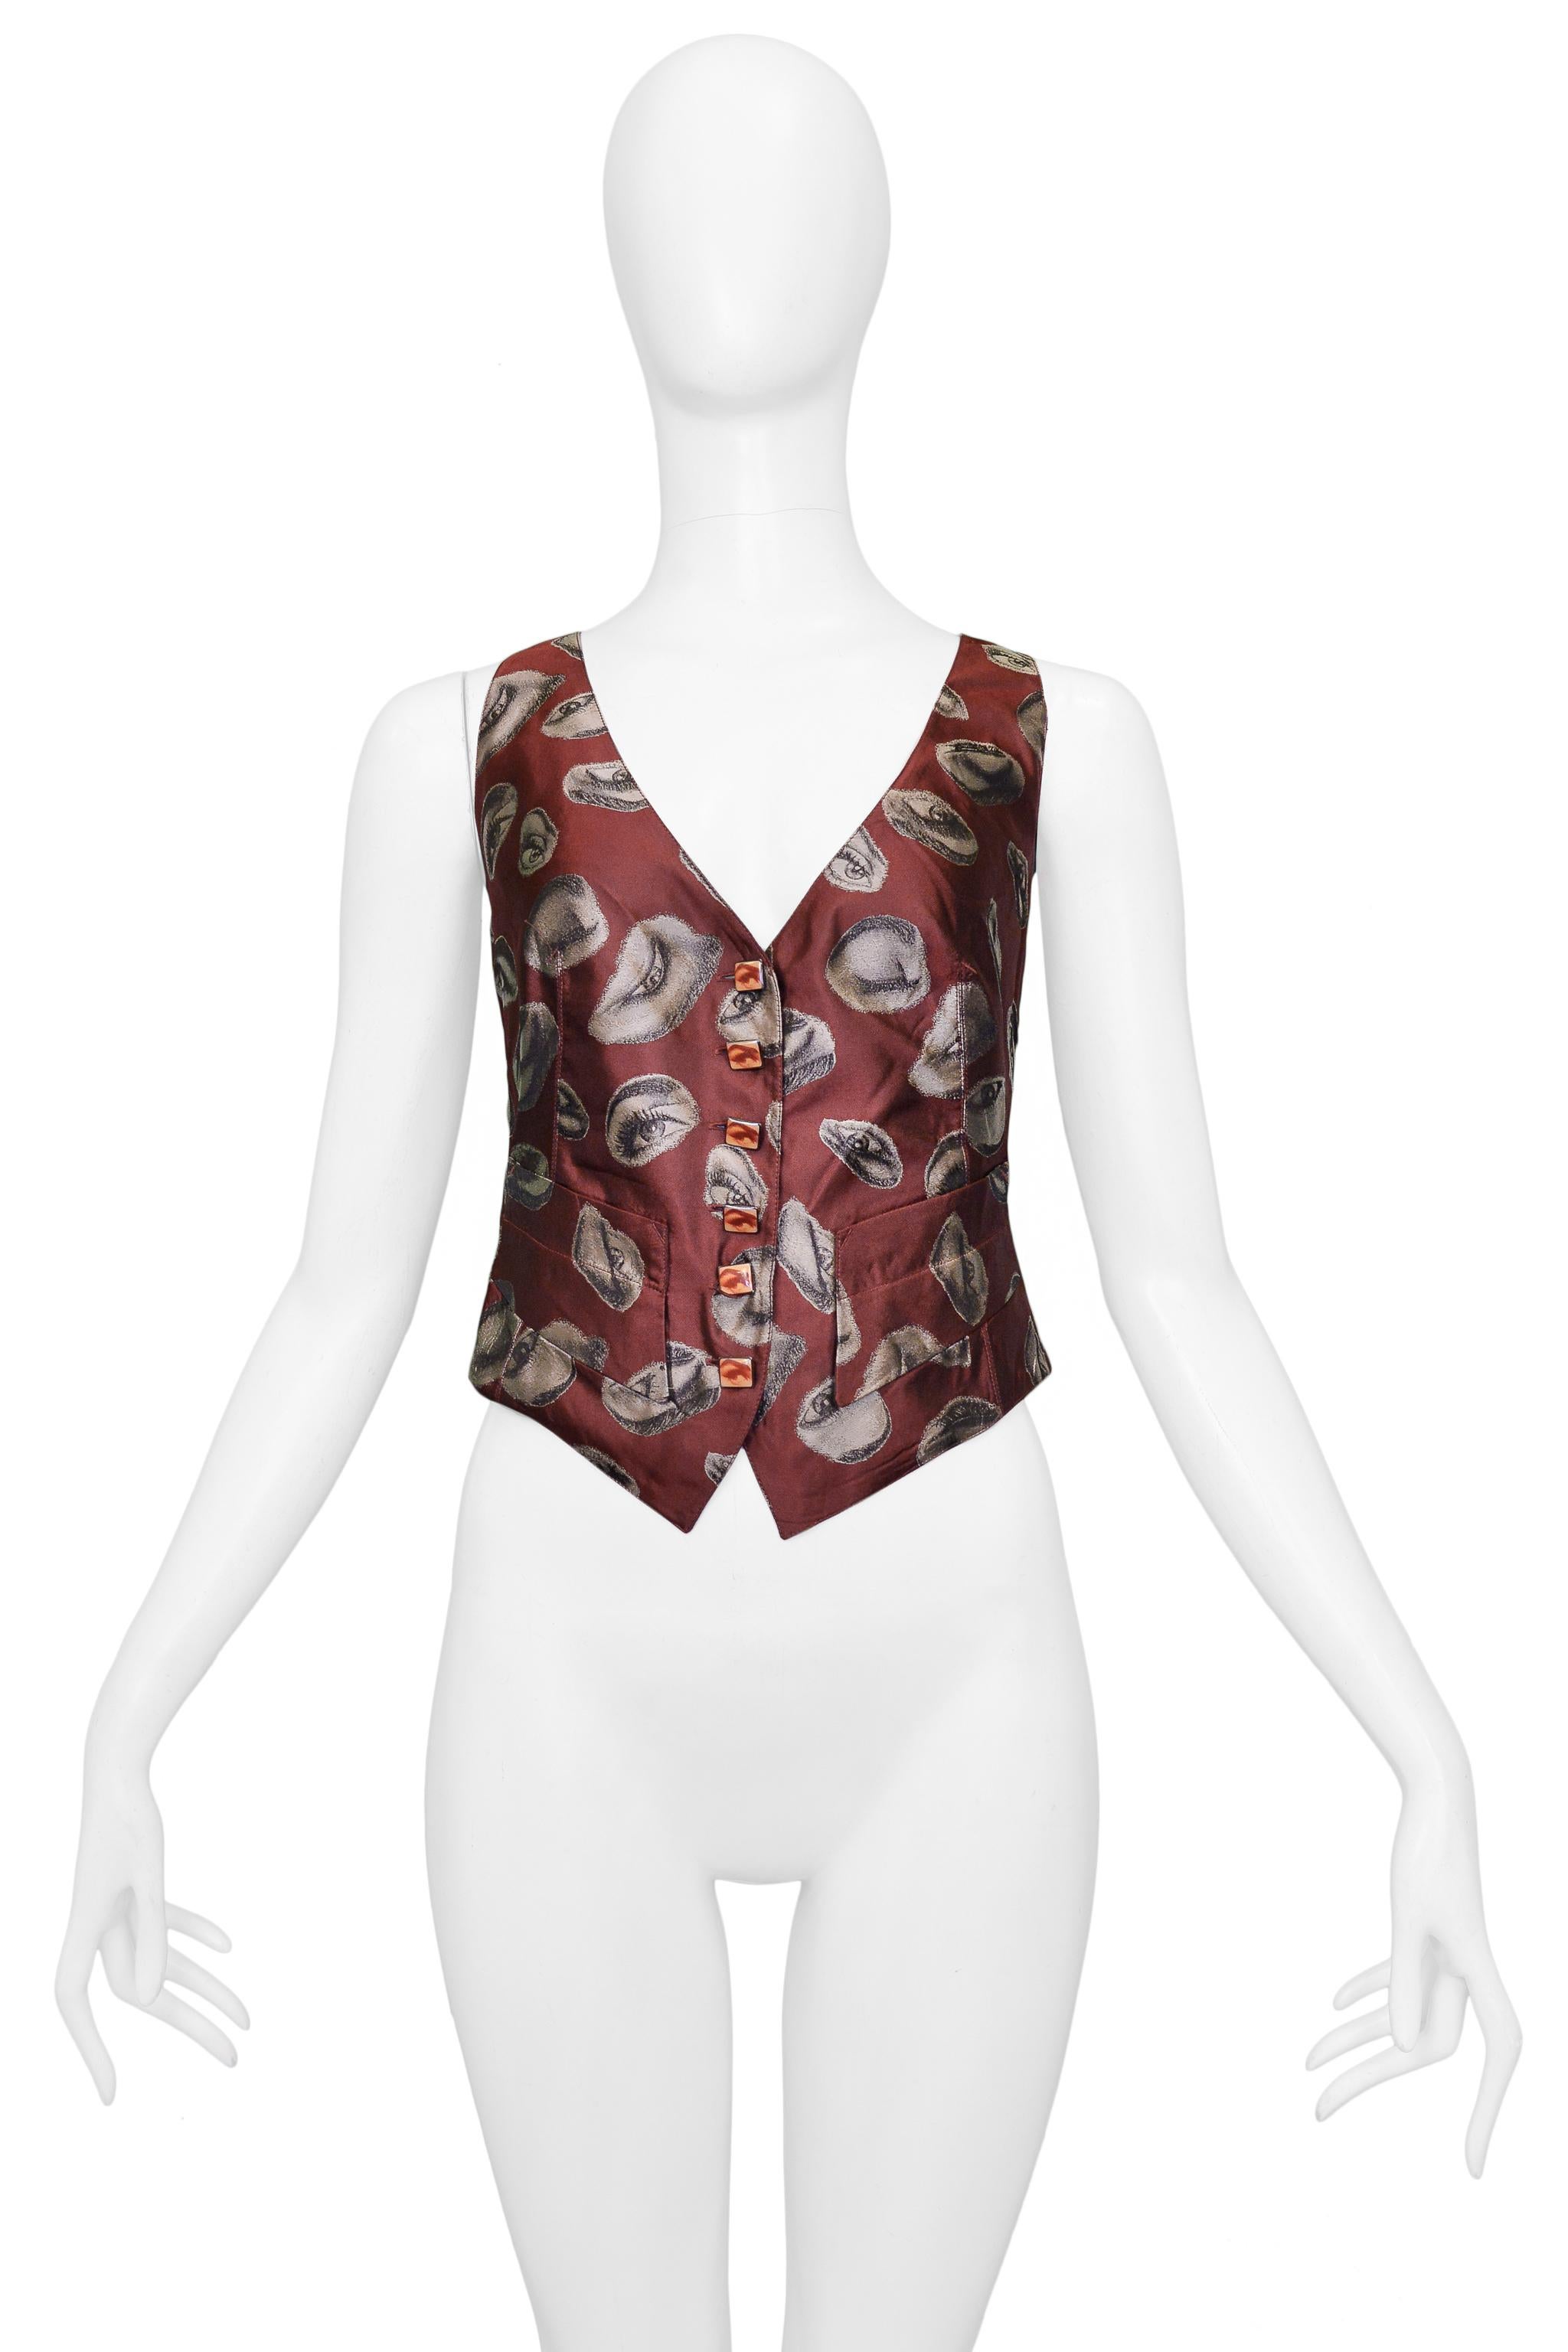 Resurrection Vintage is excited to present a vintage Jean Paul Gaultier burgundy vest featuring a surrealist-inspired eye print, photographic eye buttons, black back panel, adjustable back, and front pockets. 

Jean Paul Gaultier
Size: 42
Silk